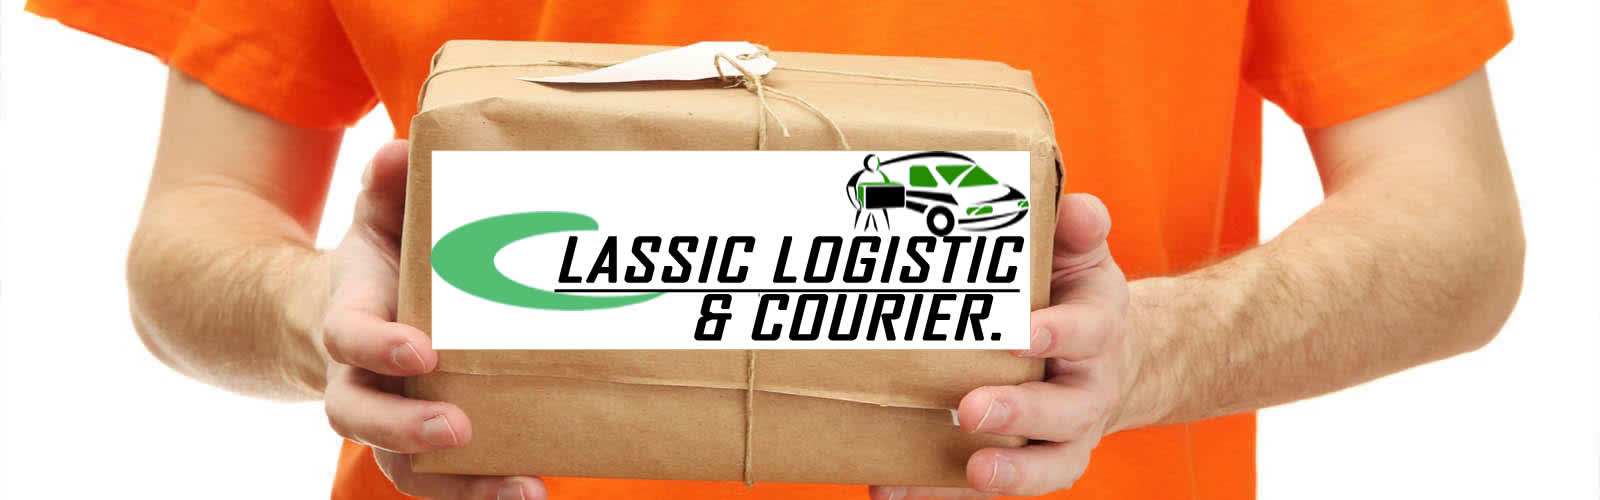 Classic Logistic & Courier